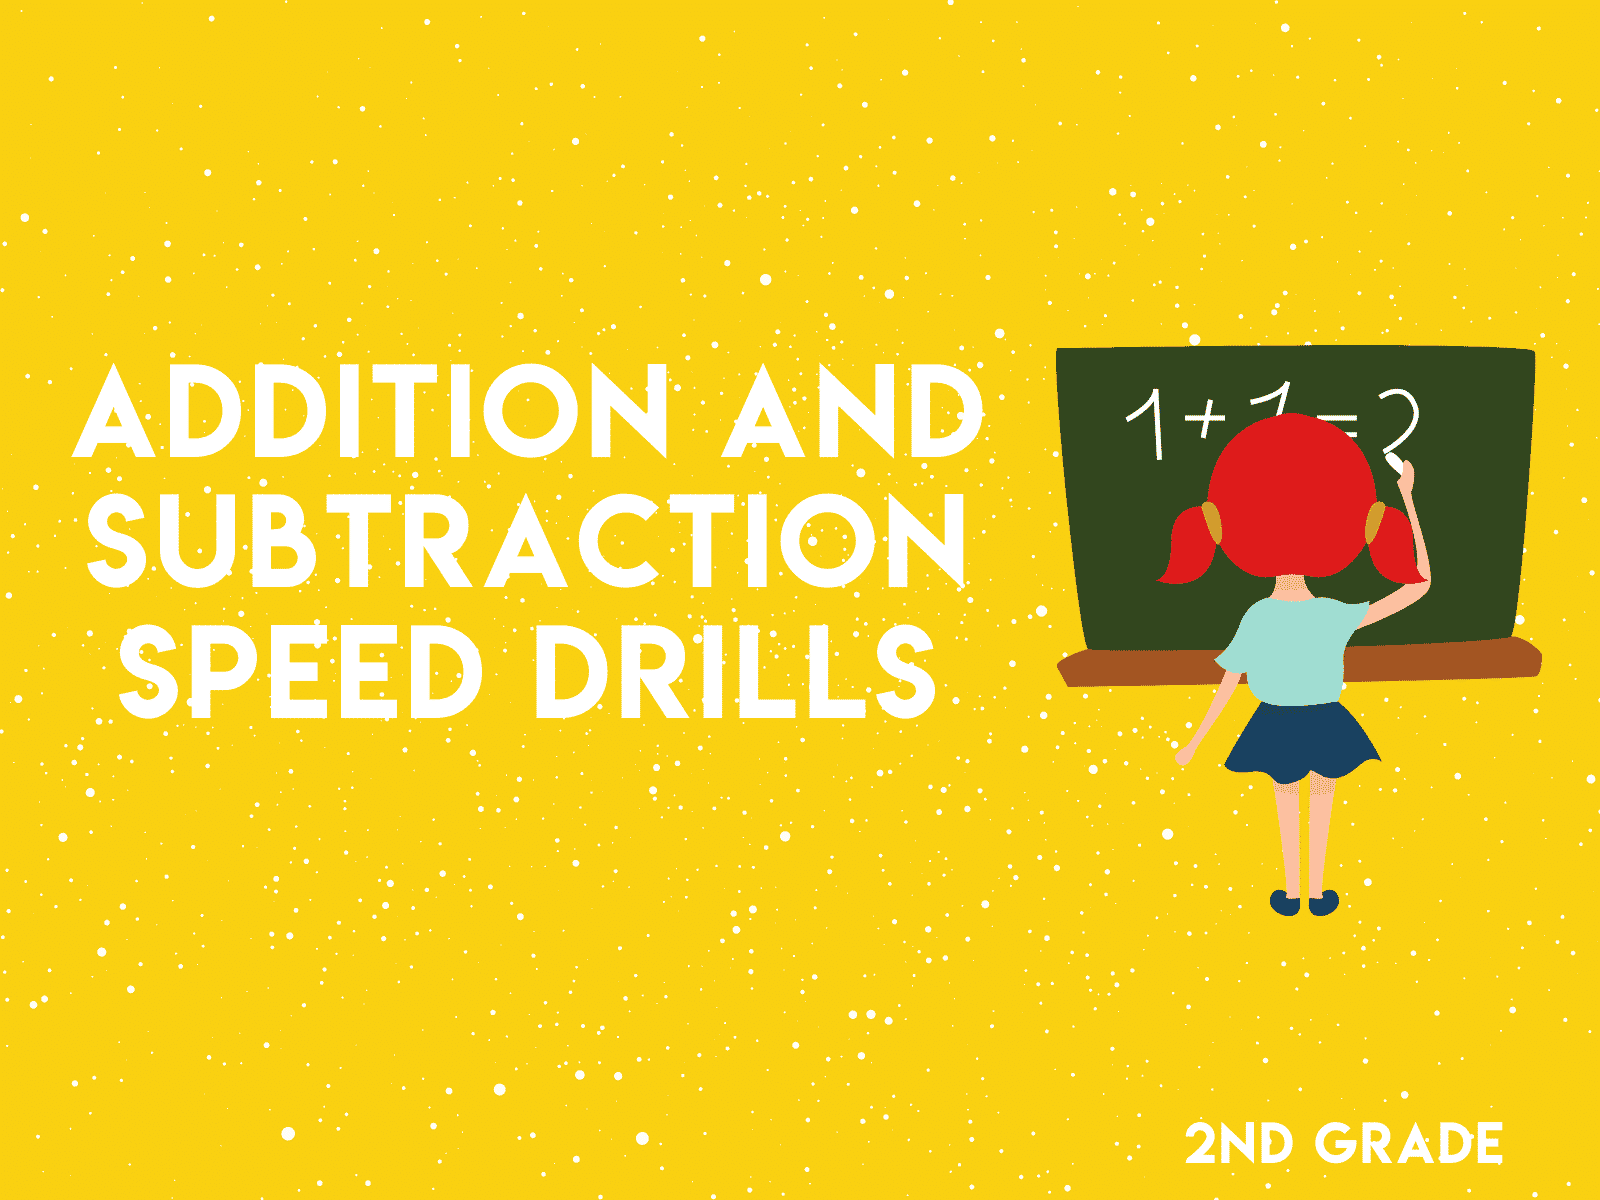 Practice your math fluency and speed with the addition and subtraction speed drills for second graders.